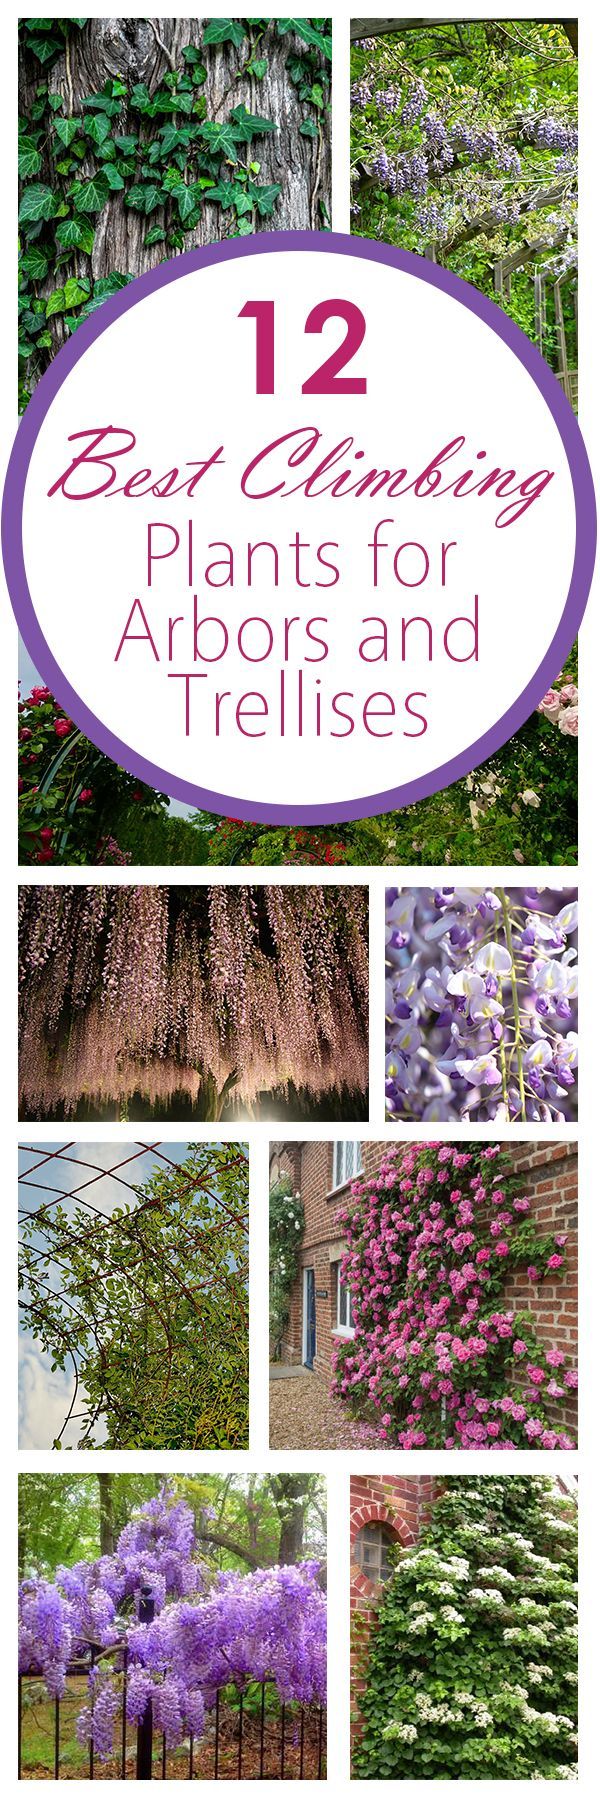 12 Best Climbing Plants for Arbors and Trellises. William – some great ideas for the condo after our wedding weddingmusicproje…